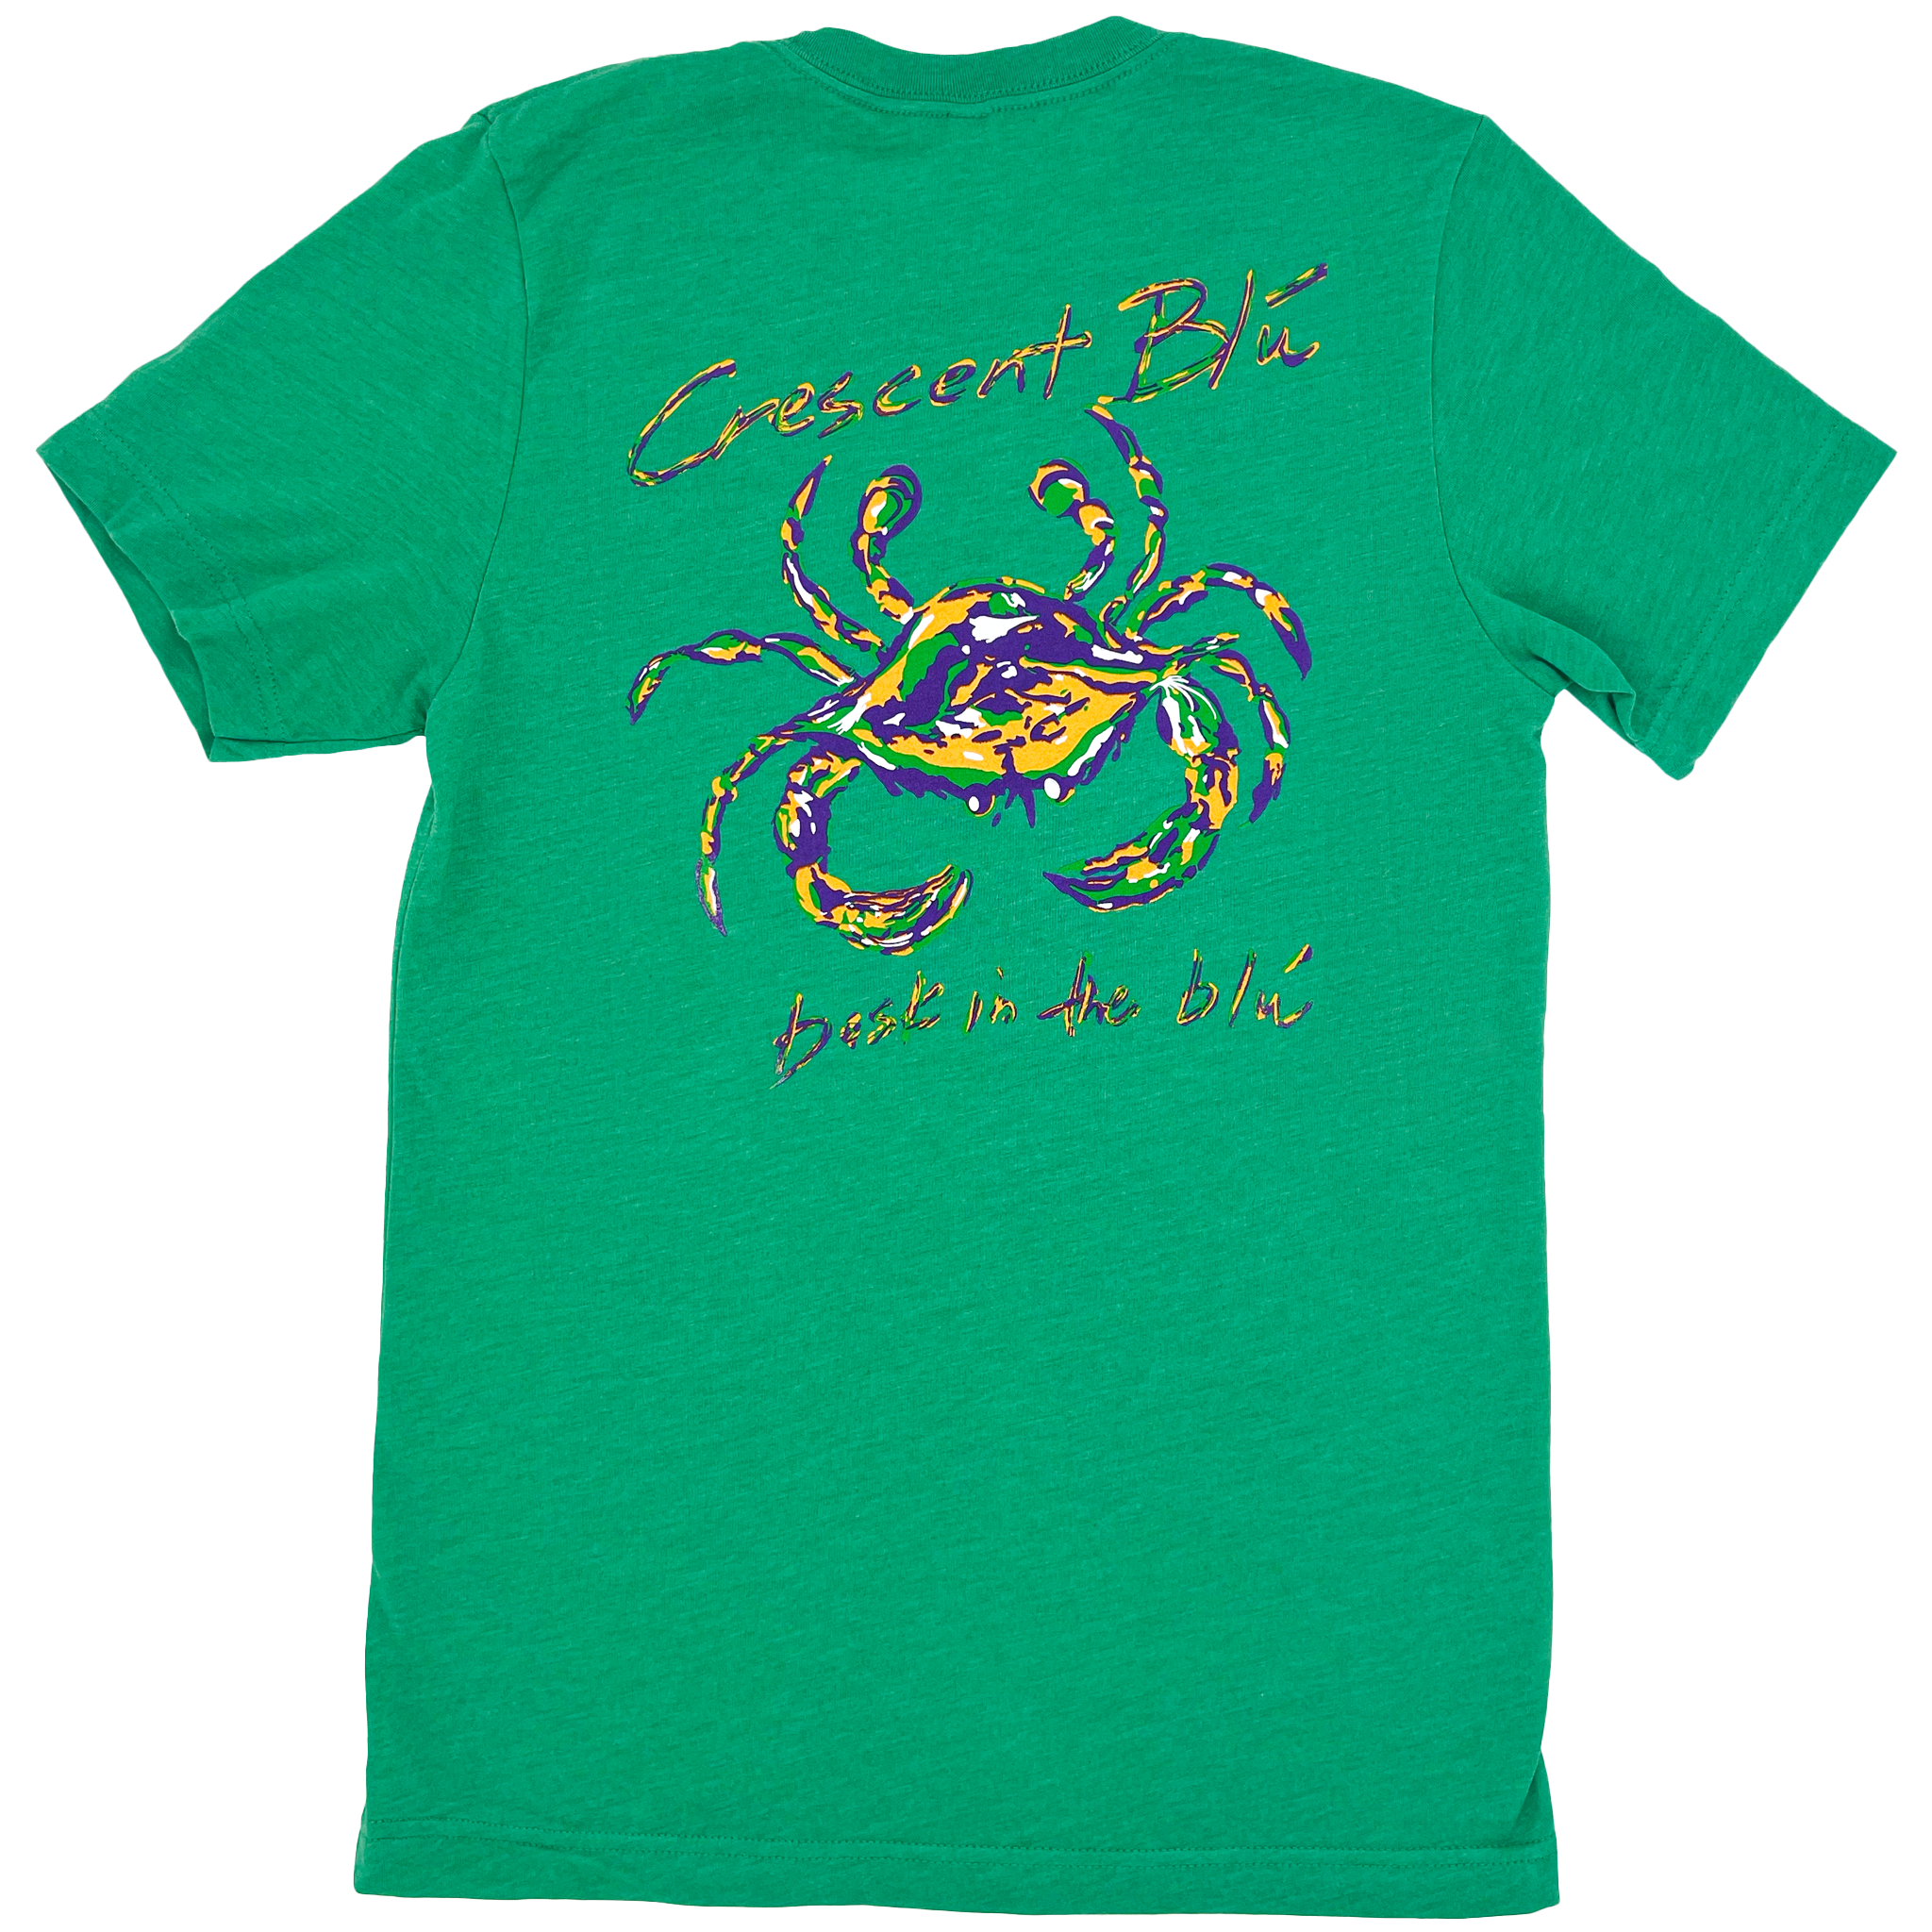 A blue crab painted in Mardi Gras colors centered on the back of a short sleeve green t-shirt.